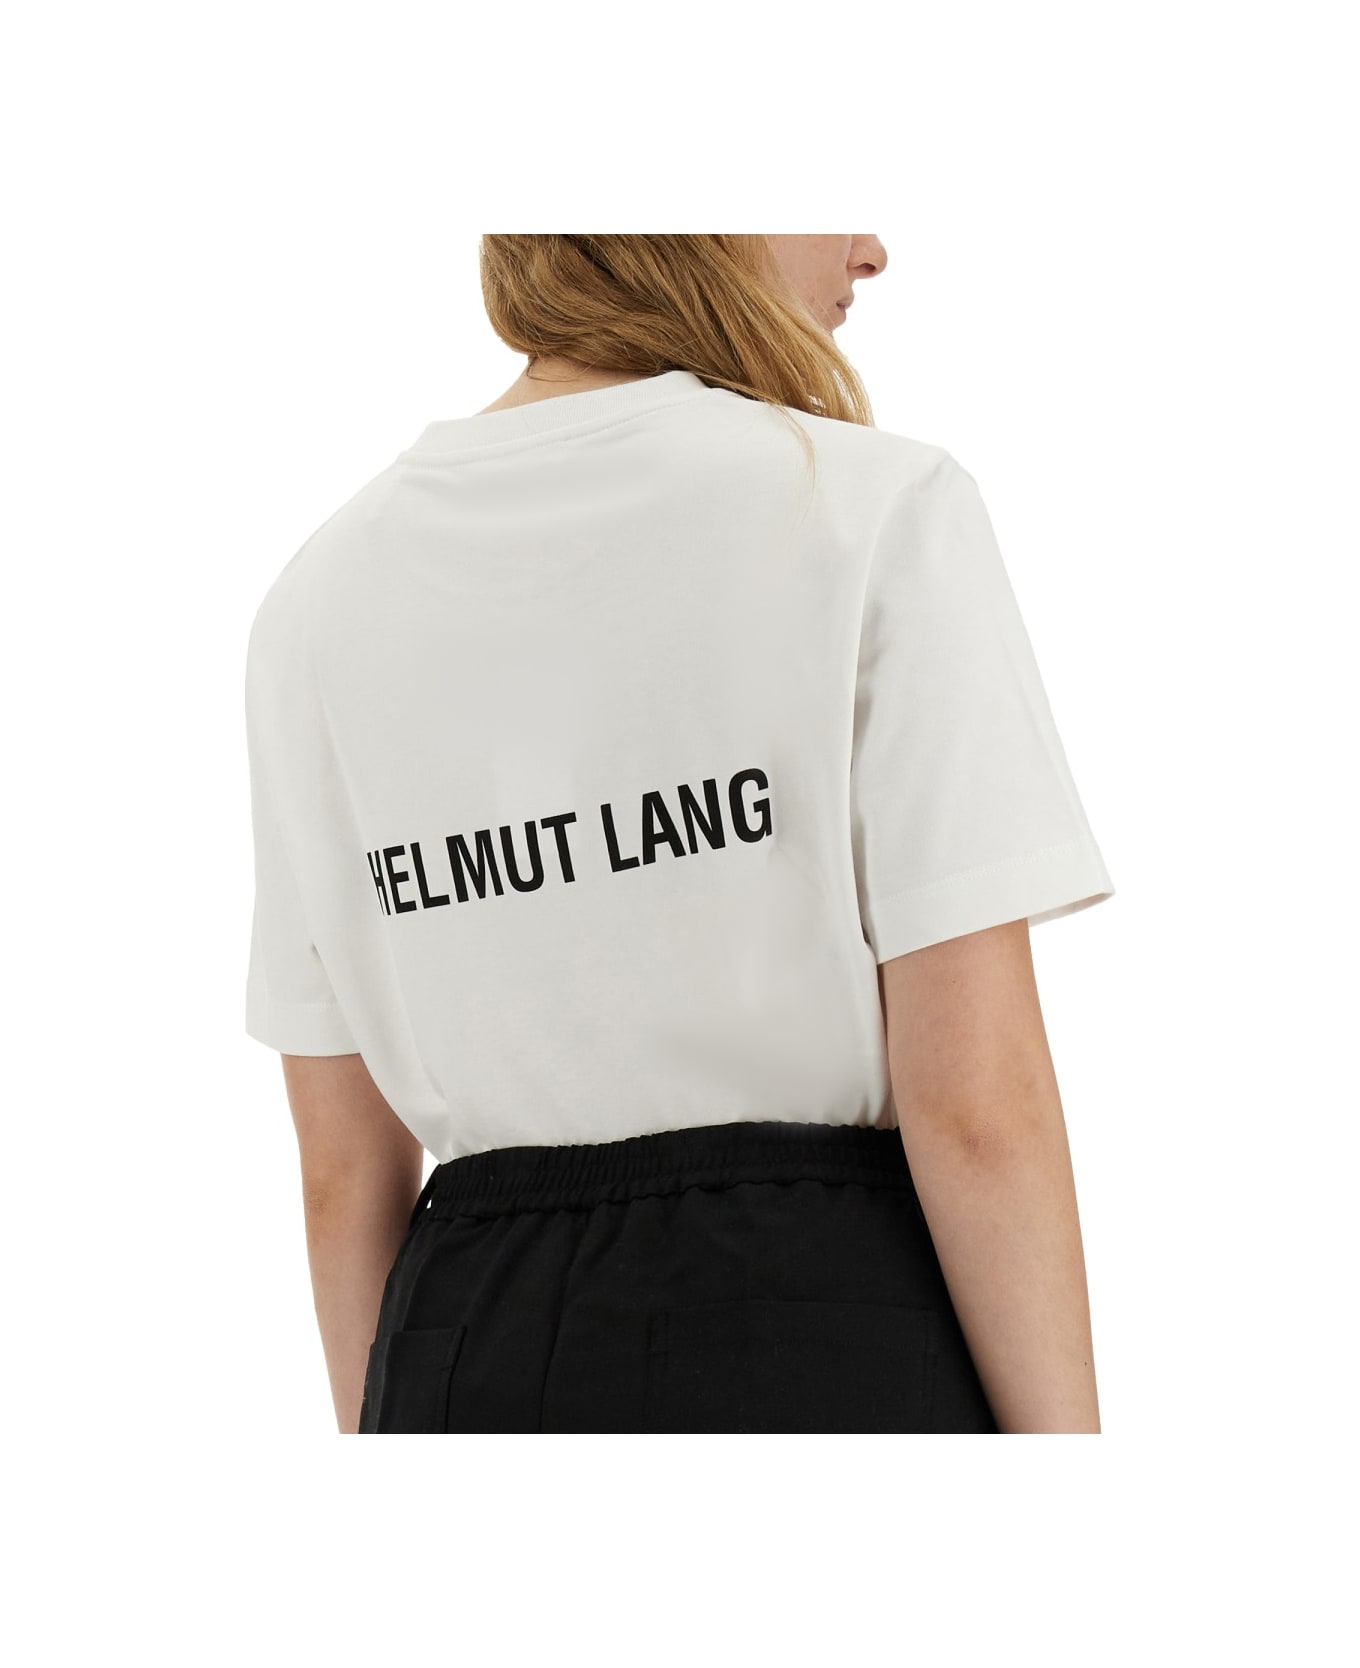 Helmut Lang T-shirt With Logo - WHITE